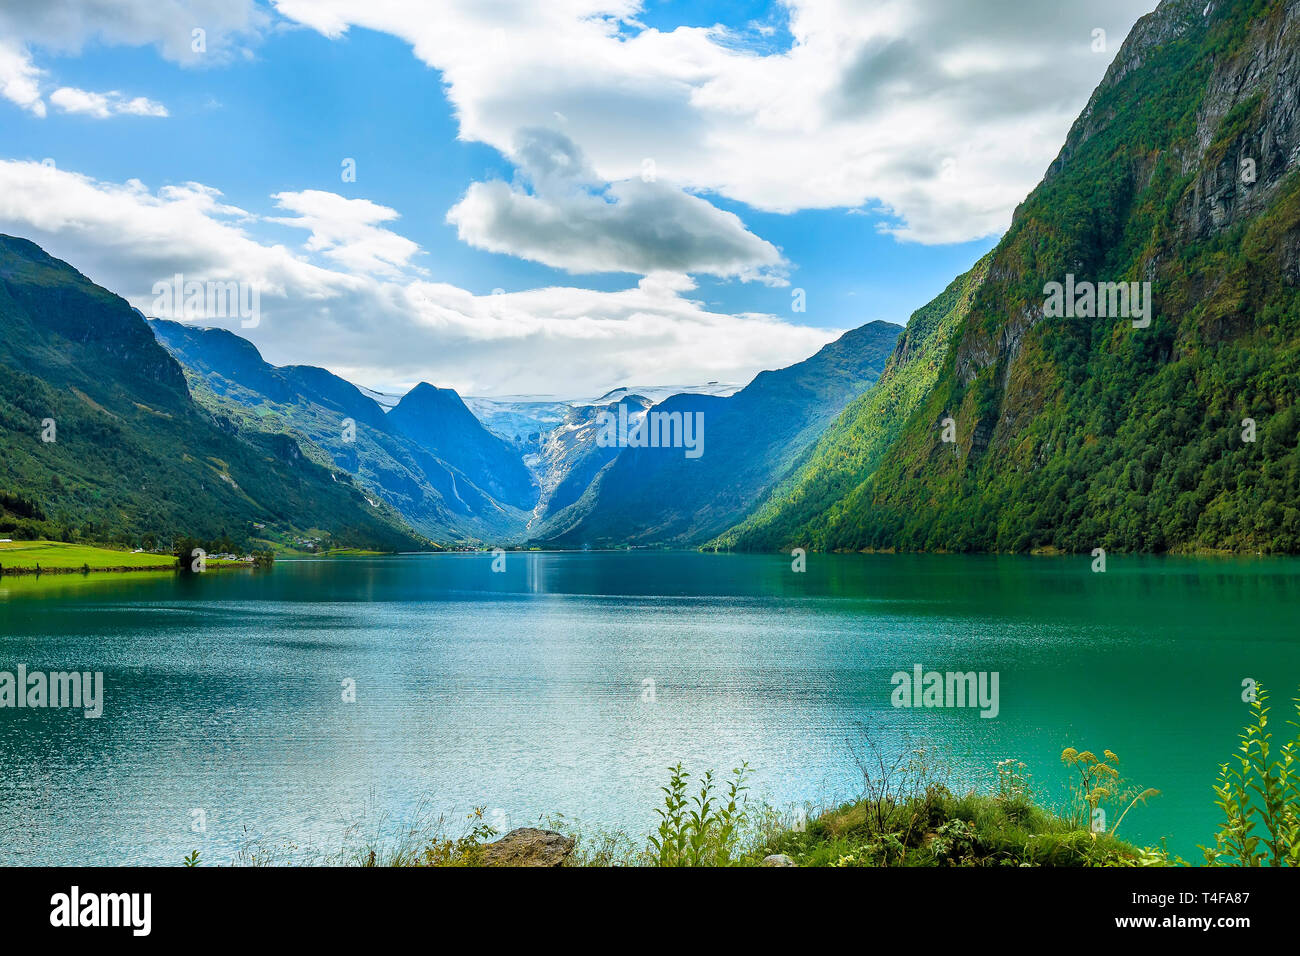 Norwegian landscape with Nordfjord fjord, mountains, flowers and glacier in Olden, Norway Stock Photo